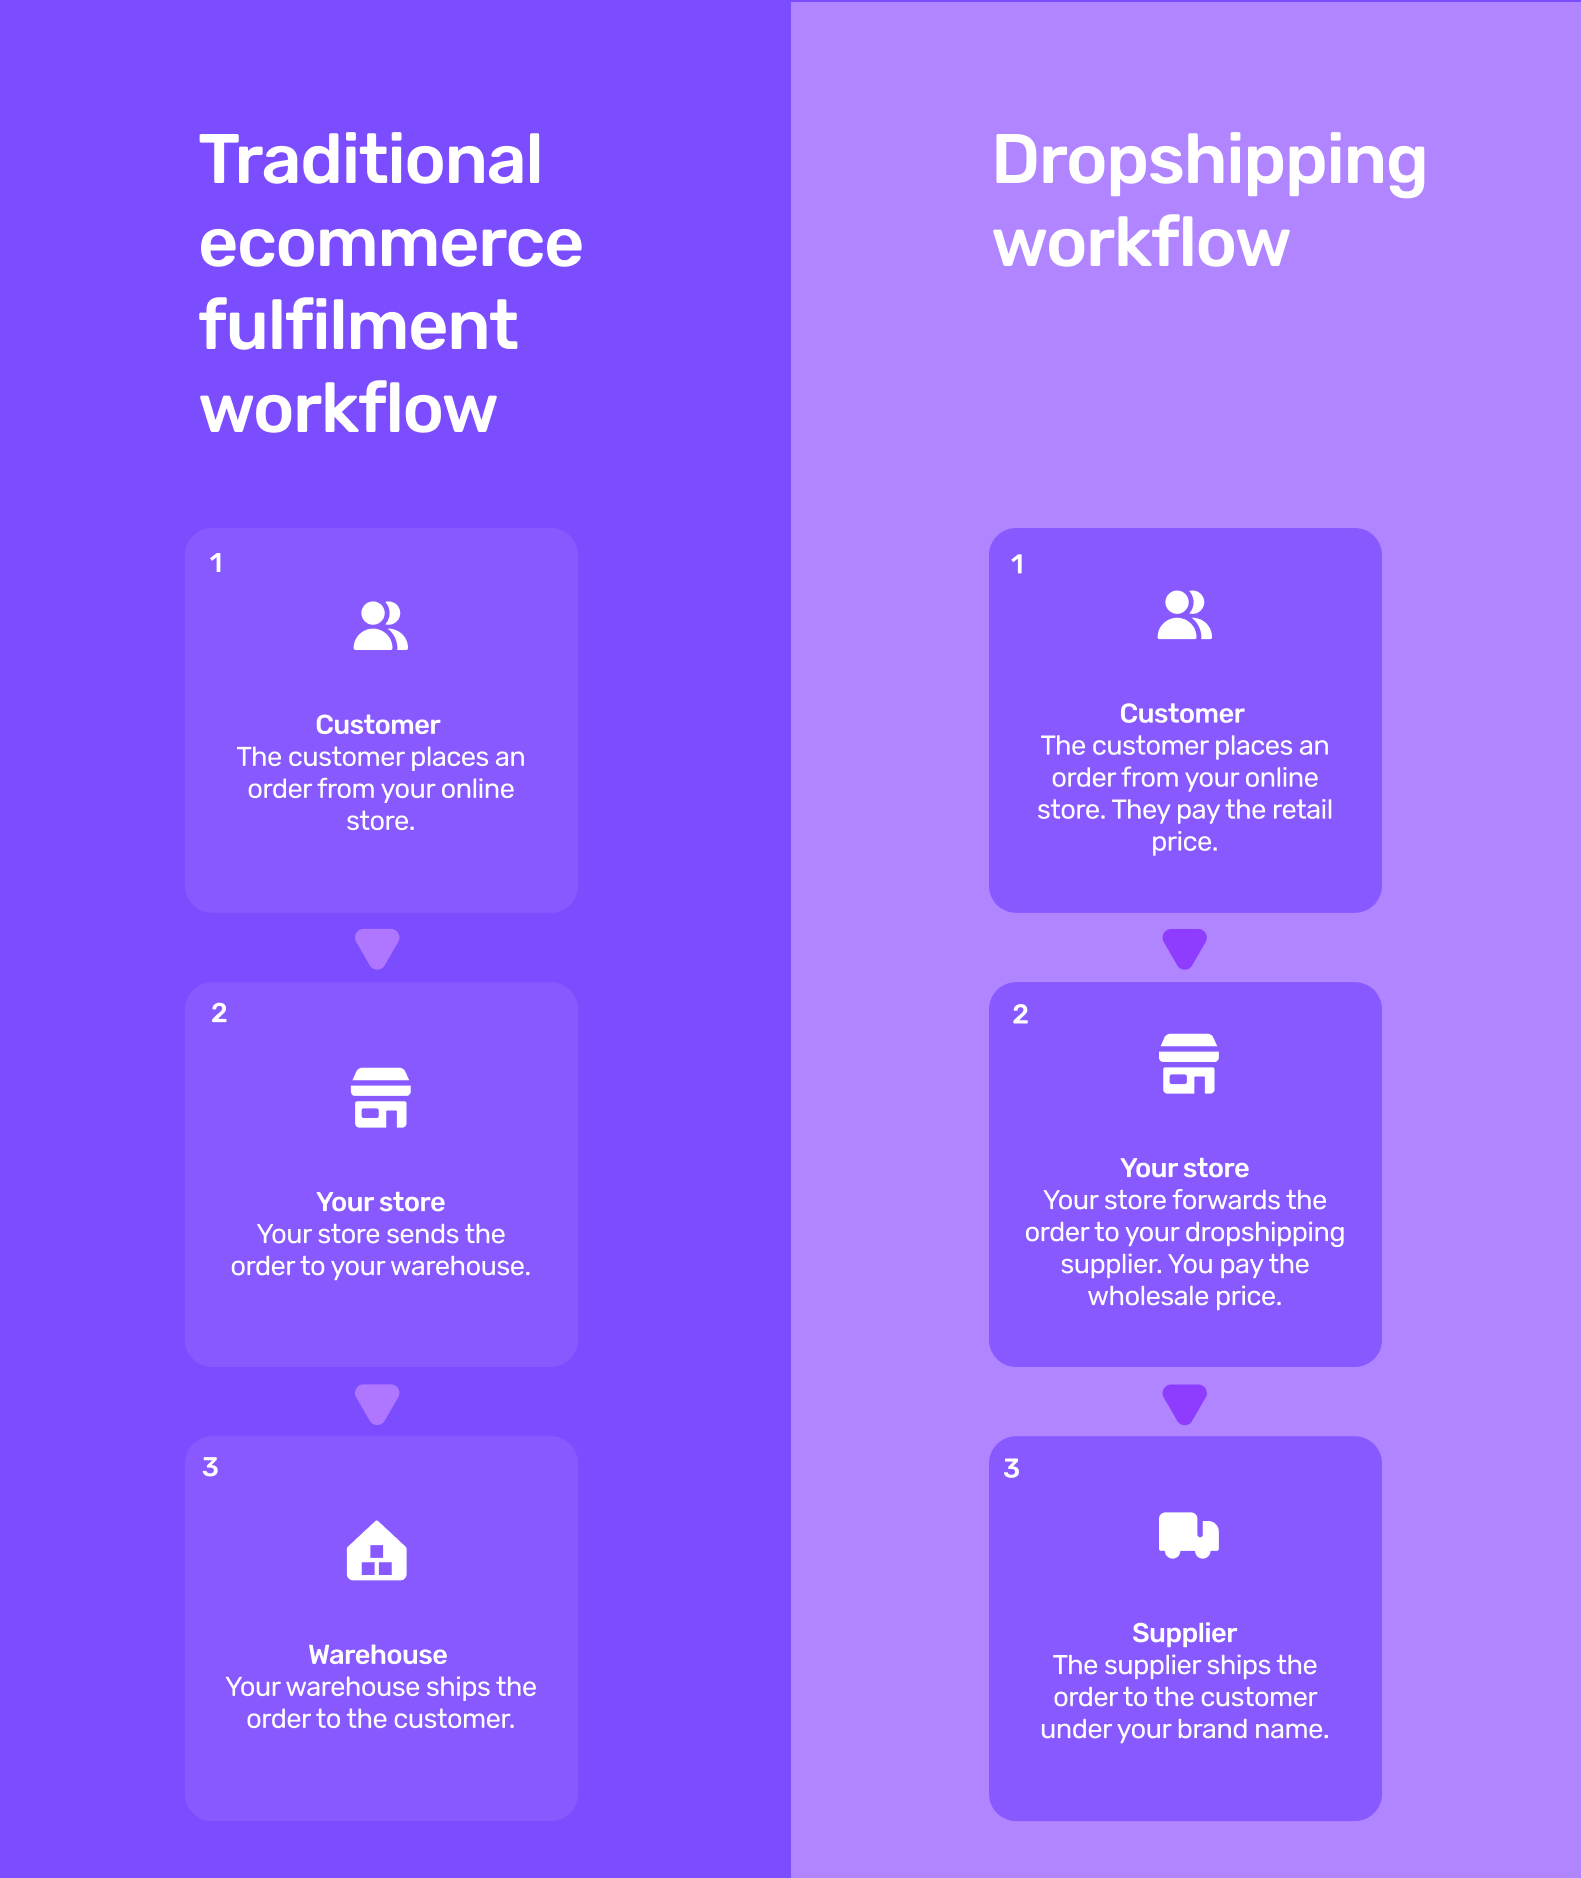 Order fulfilment workflow - ecommerce vs dropshipping